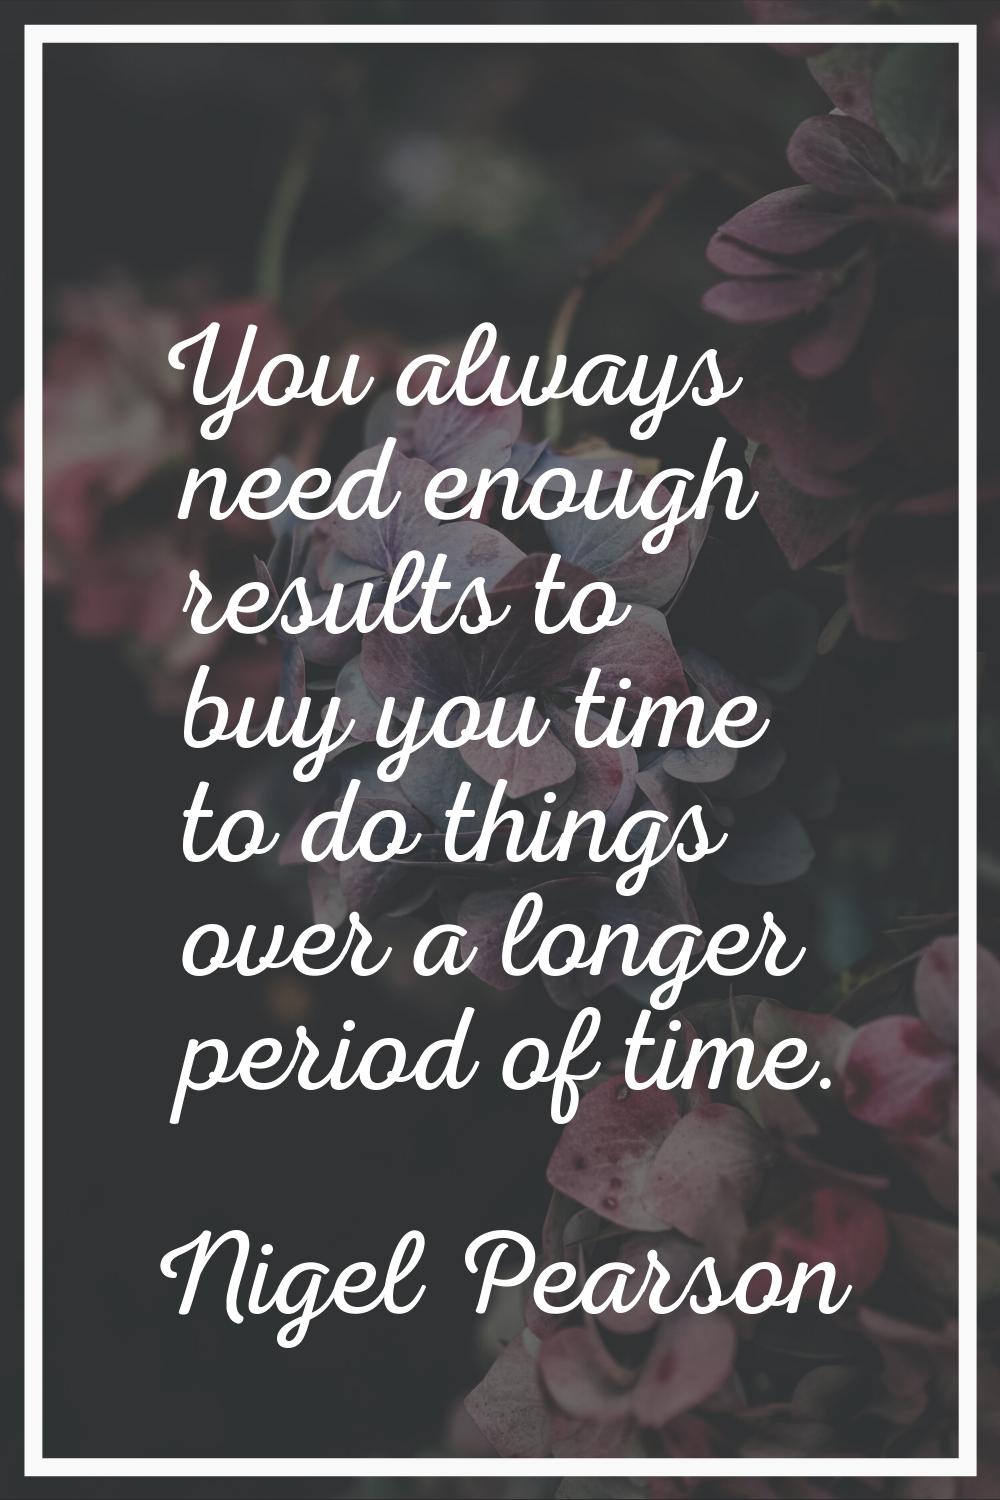 You always need enough results to buy you time to do things over a longer period of time.